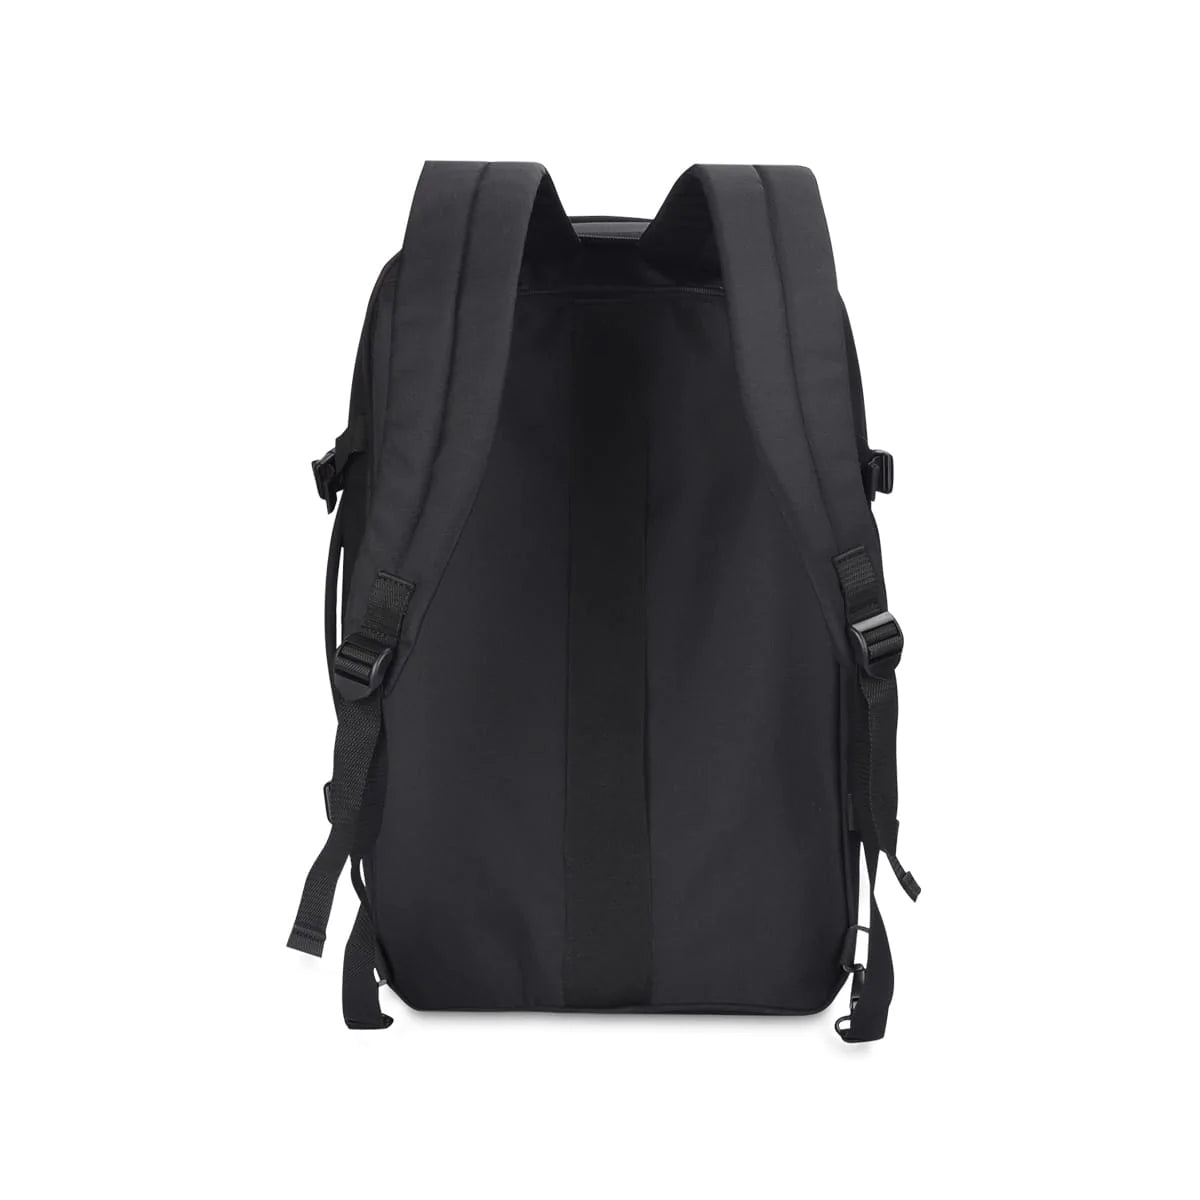 Black | Protecta Simple Equation Convertible Office Trave Laptop Backpack-3